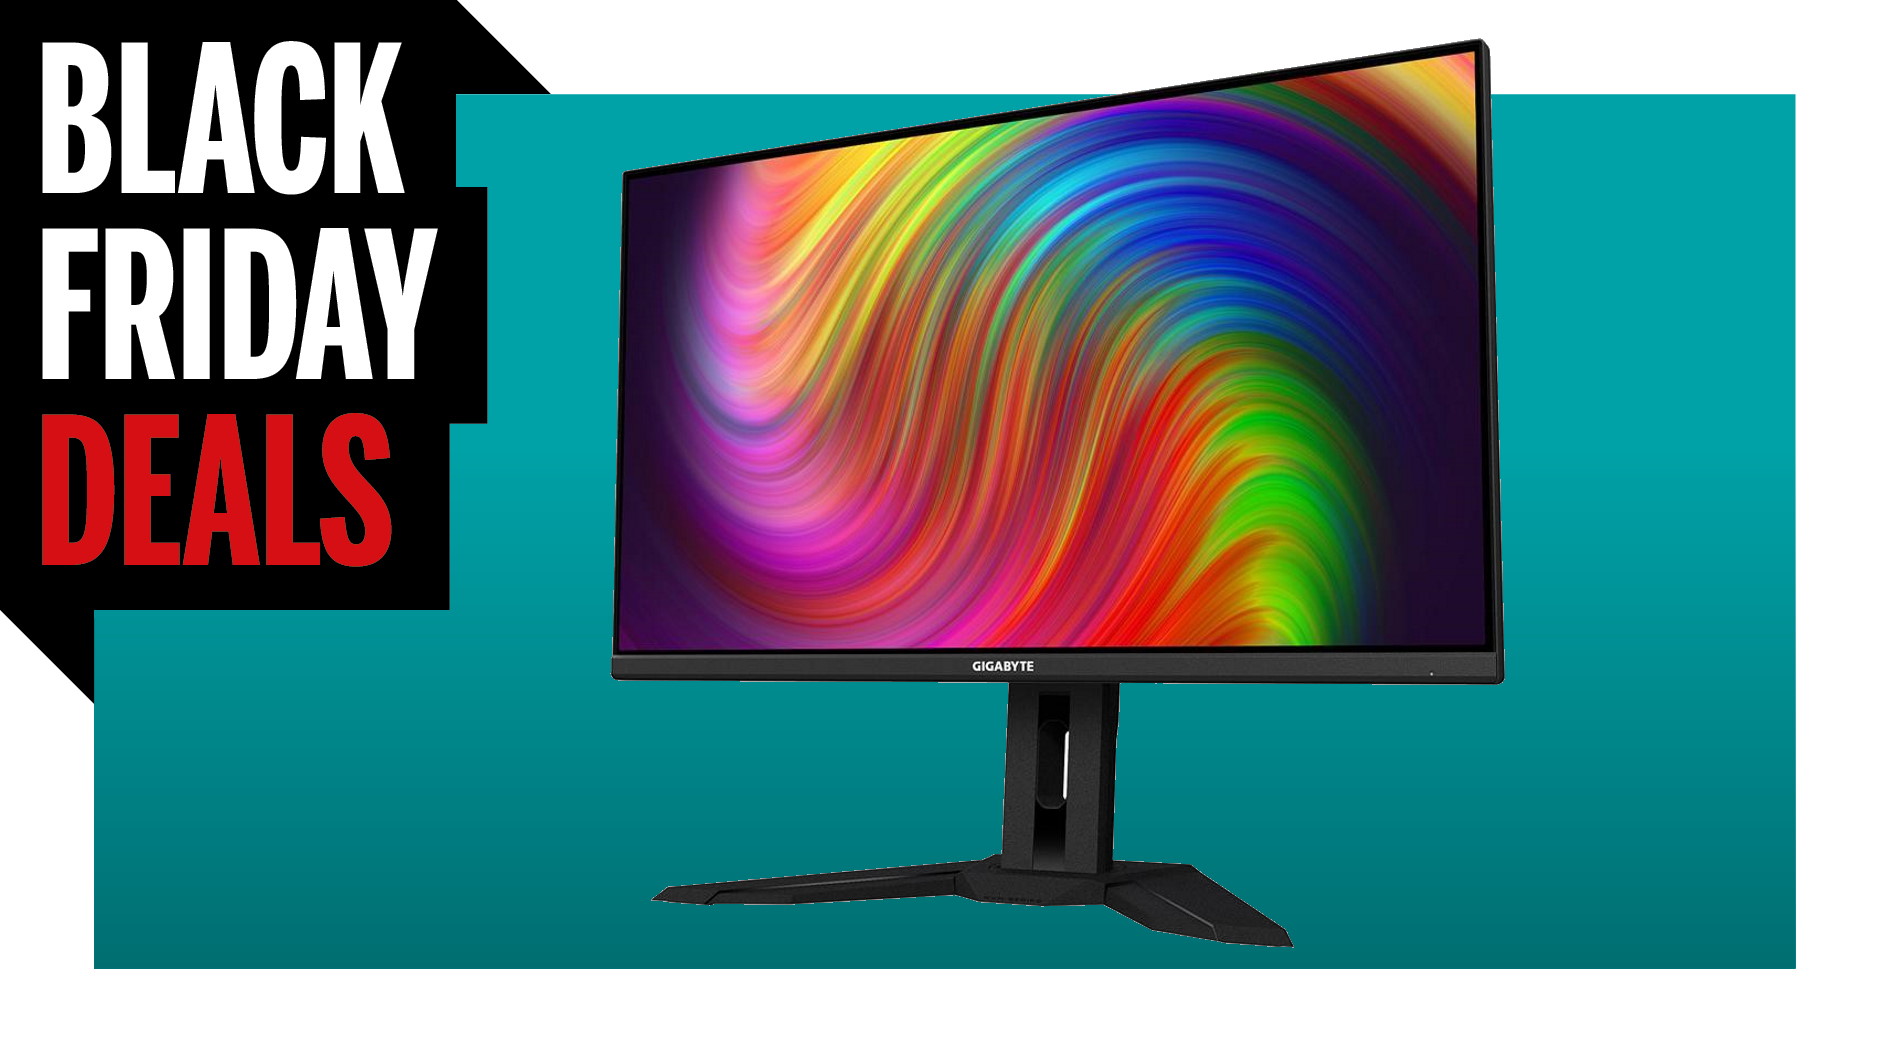  Gigabyte's M32Q, the 32-inch version of one of our favorite monitors, is down to just $359  